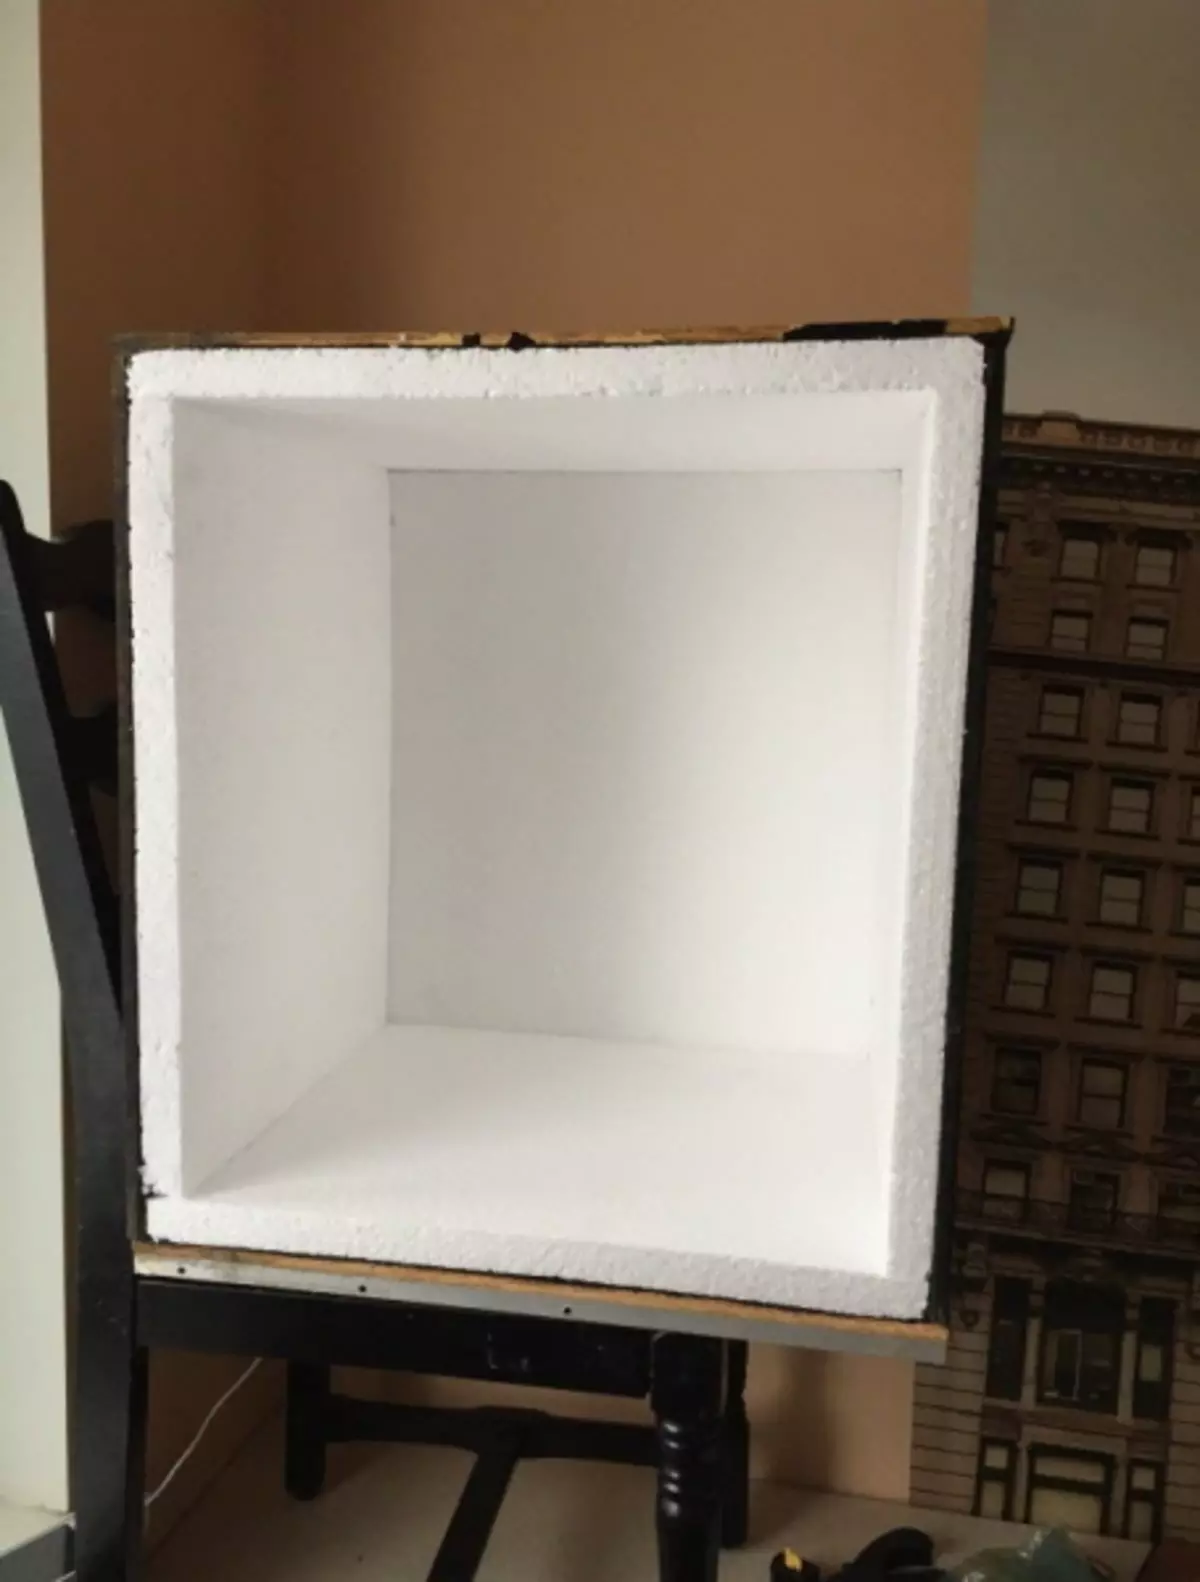 Homemade acoustic screen for microphone